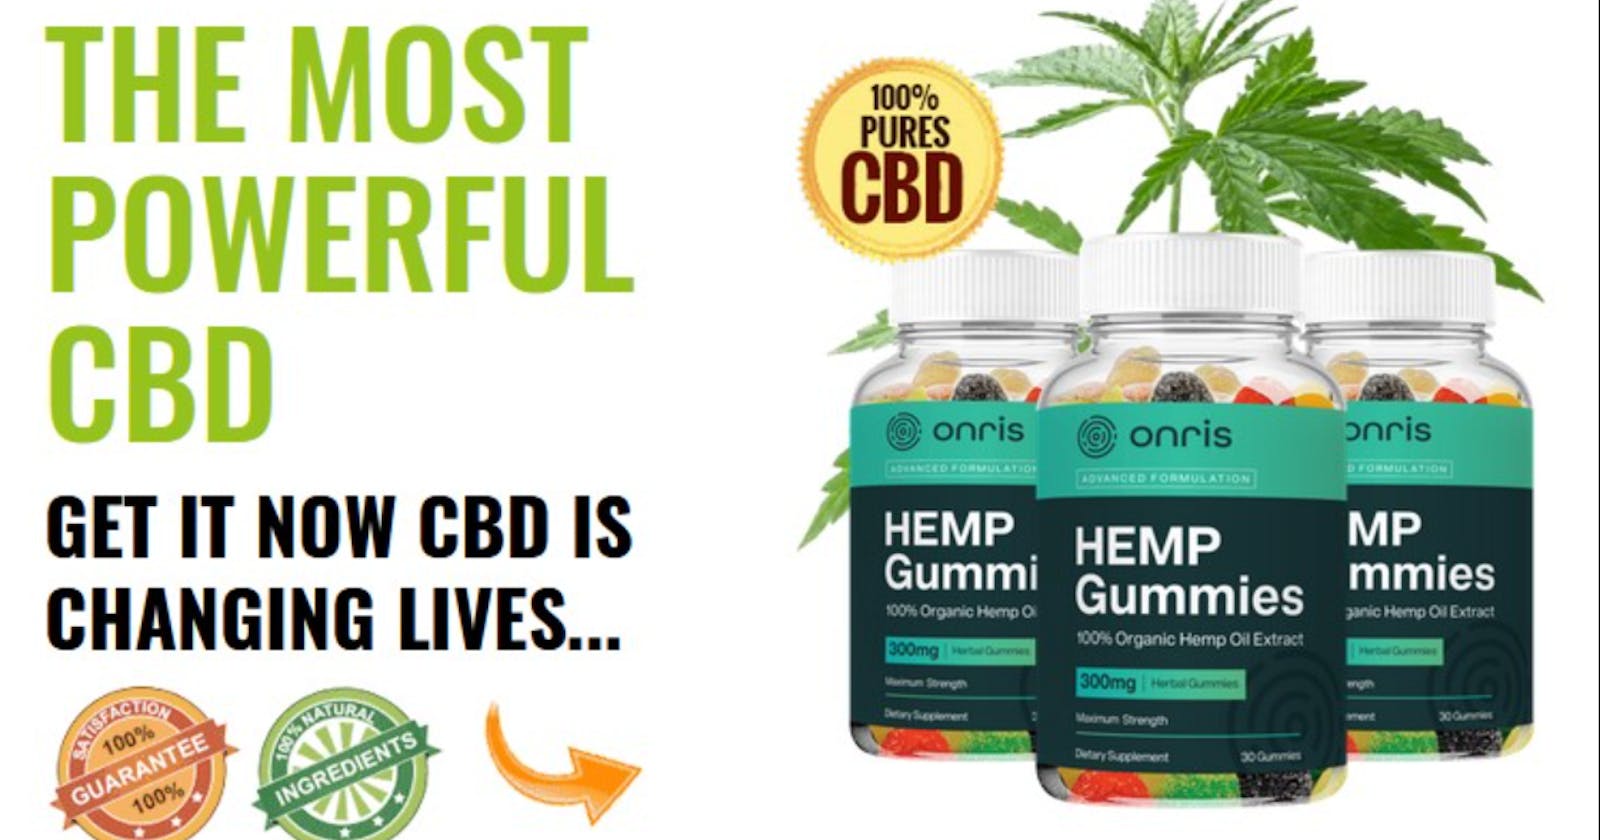 Experience the Power of CBD with Onris CBD Gummies UK: Safe, Effective, and Organic!